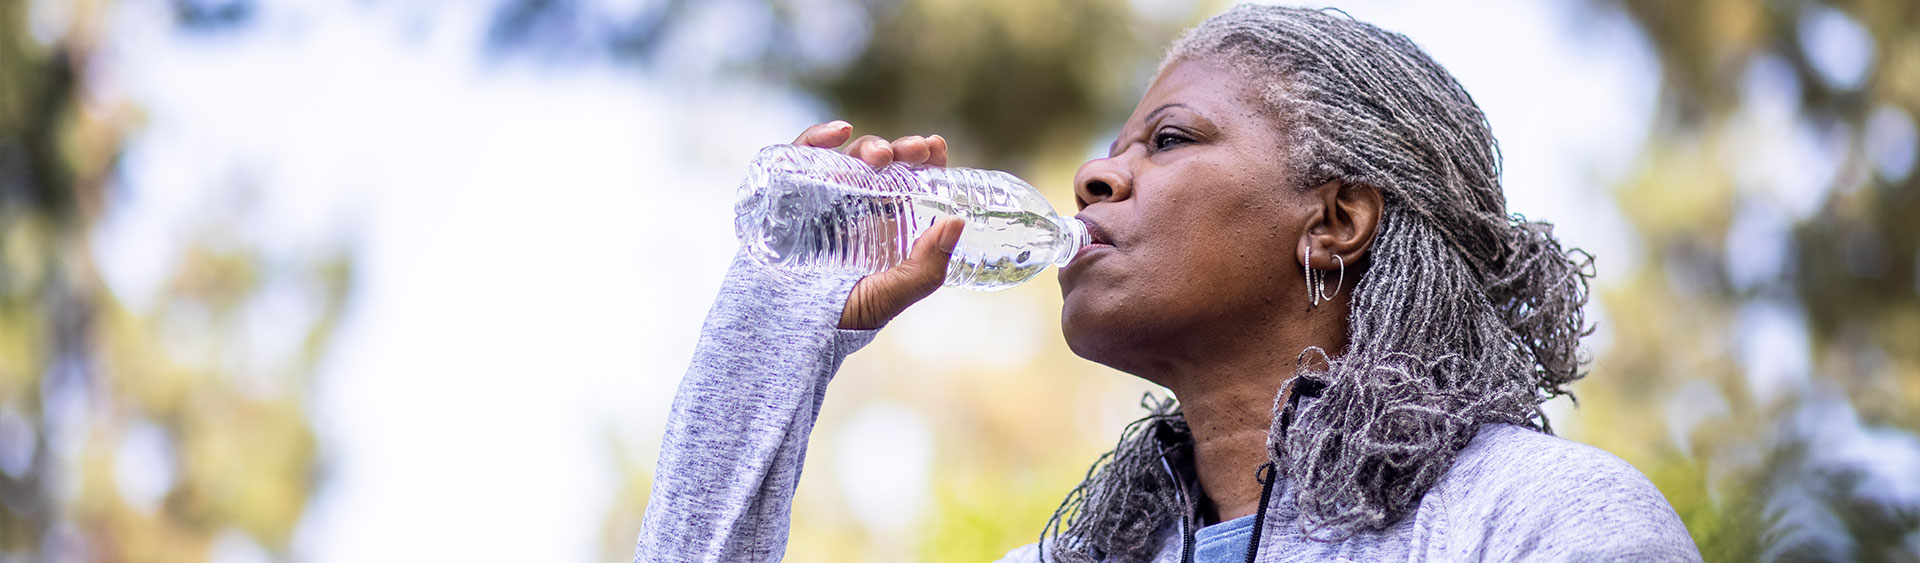 A woman in workout gear drinks from a water bottle. Hydration is vital to bladder health as well as odor control.